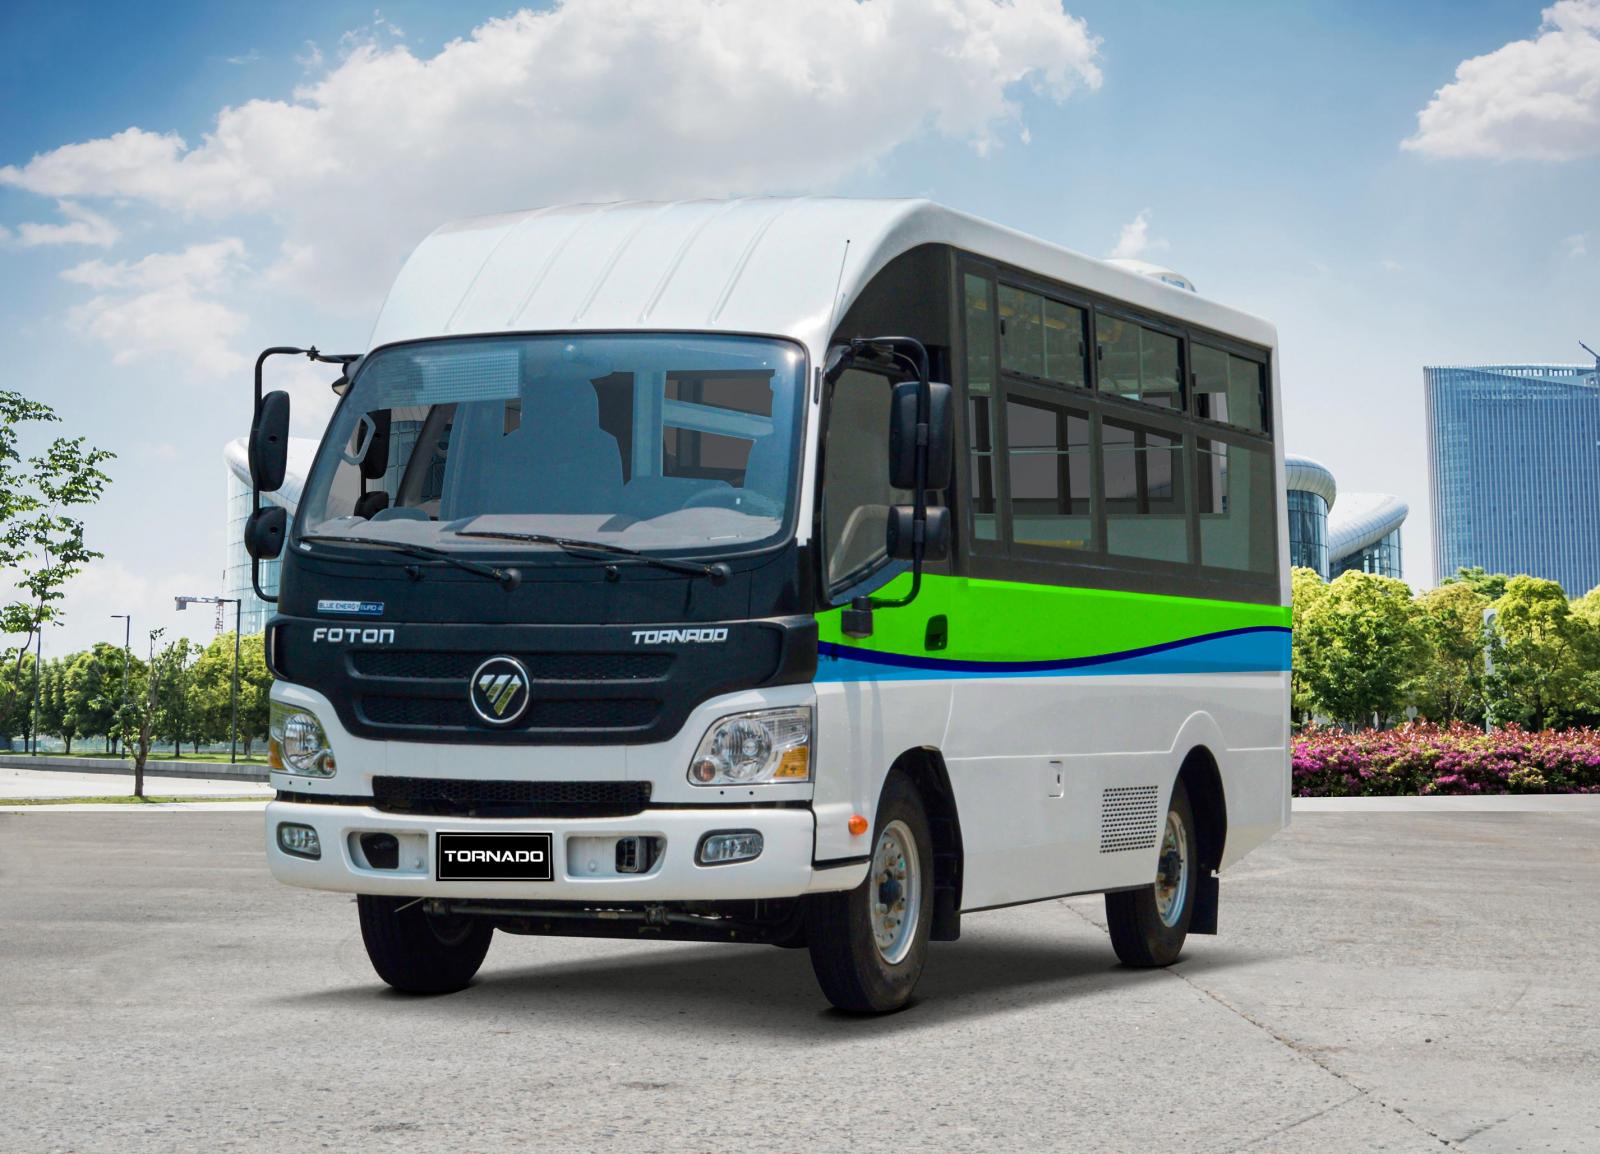 Foton Philippines to introduce three modern Jeepneys this week